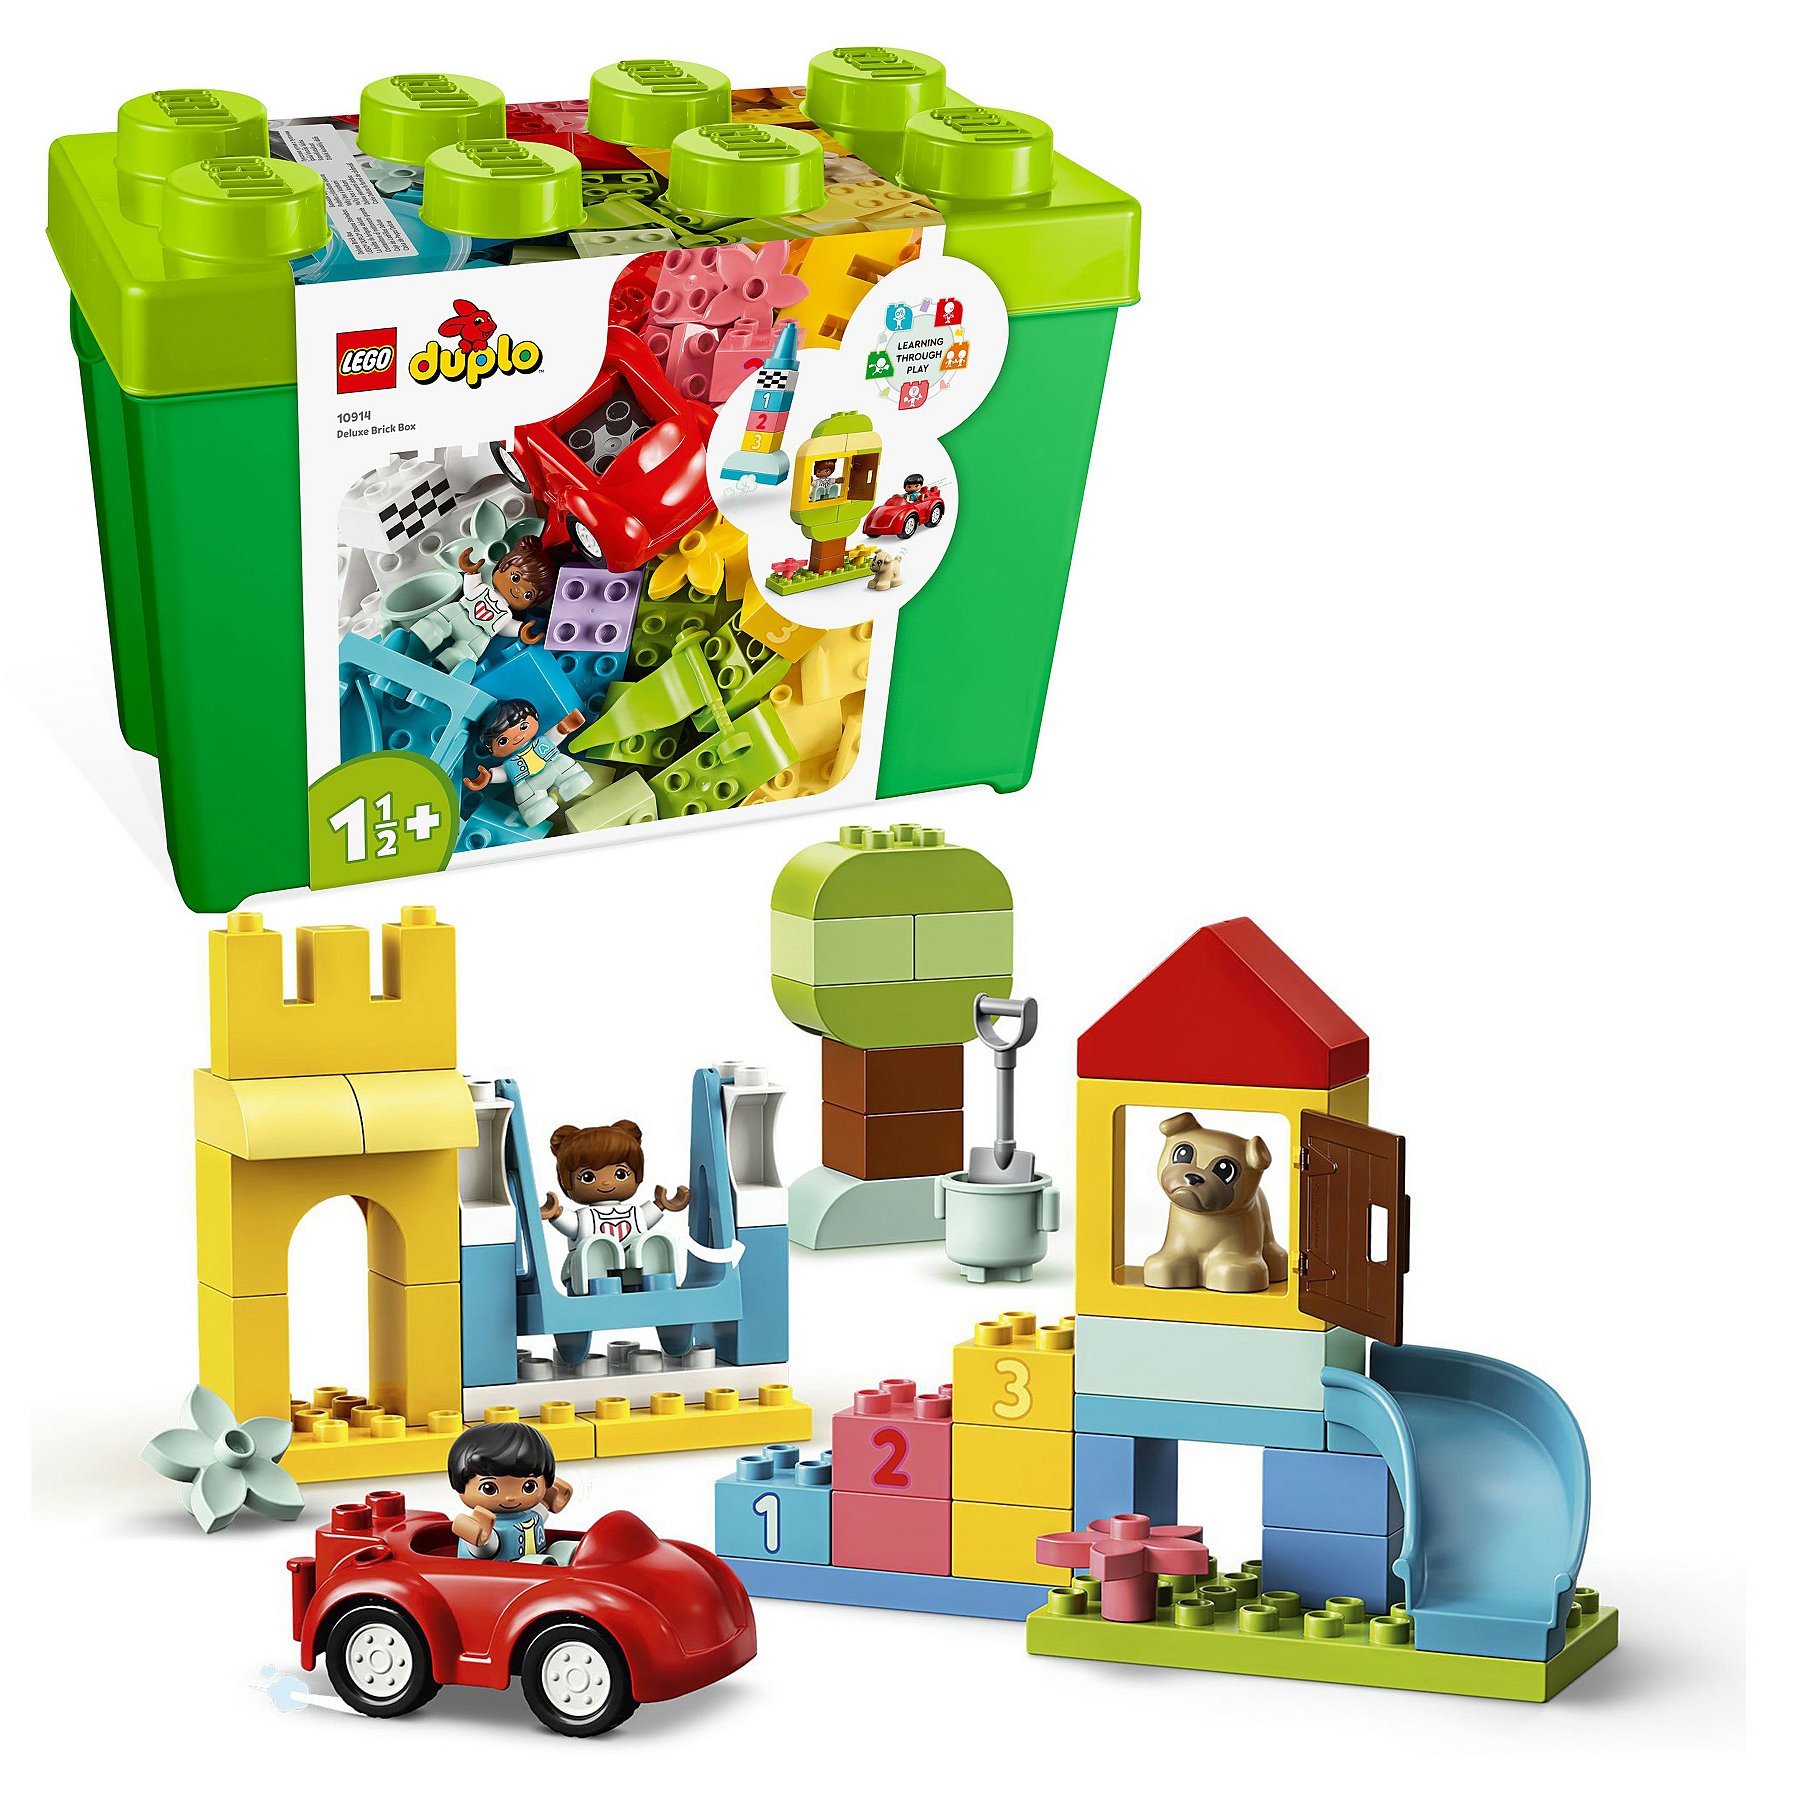 LEGO DUPLO Classic Deluxe Brick Box 10914 | Toys & Character |